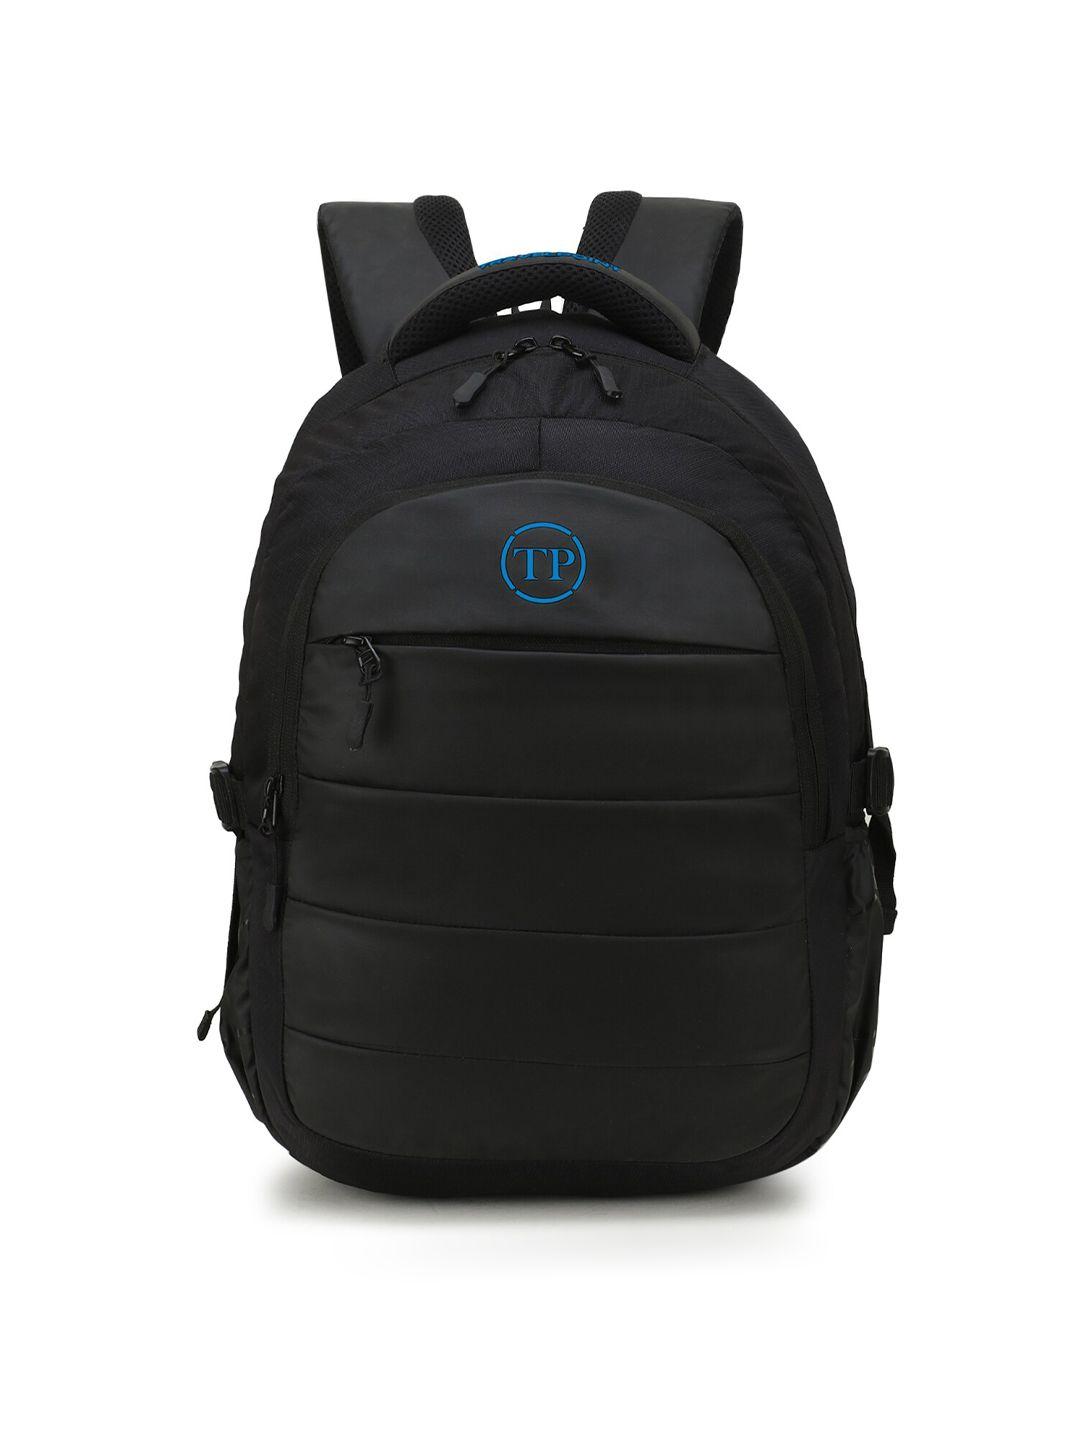 travel point black brand logo backpack with compression straps